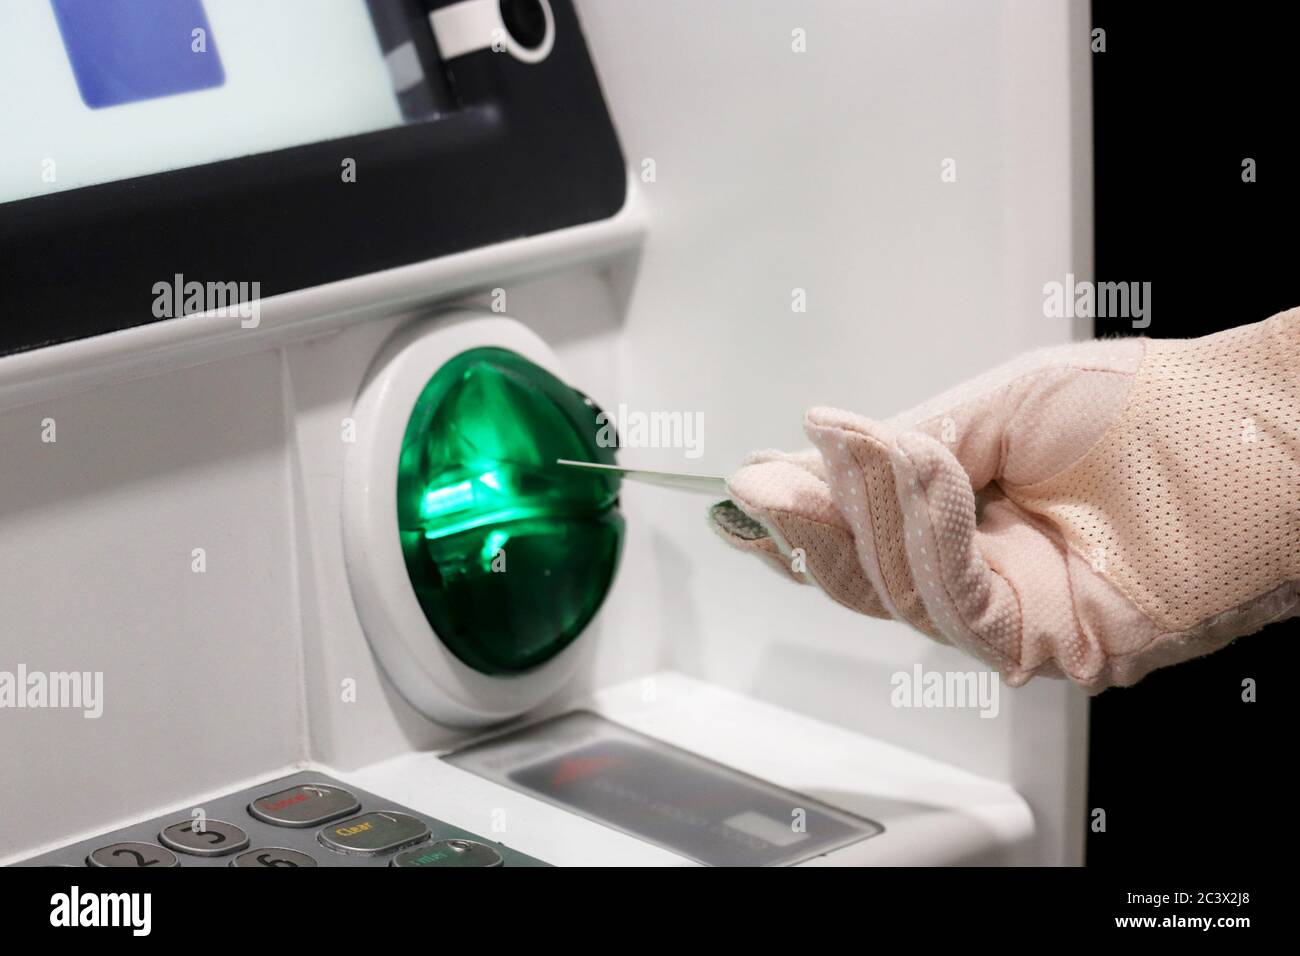 Woman inserts a bank card into ATM receiver. Female hand in a protective glove, financial transaction and safety measures during the covid-19 Stock Photo